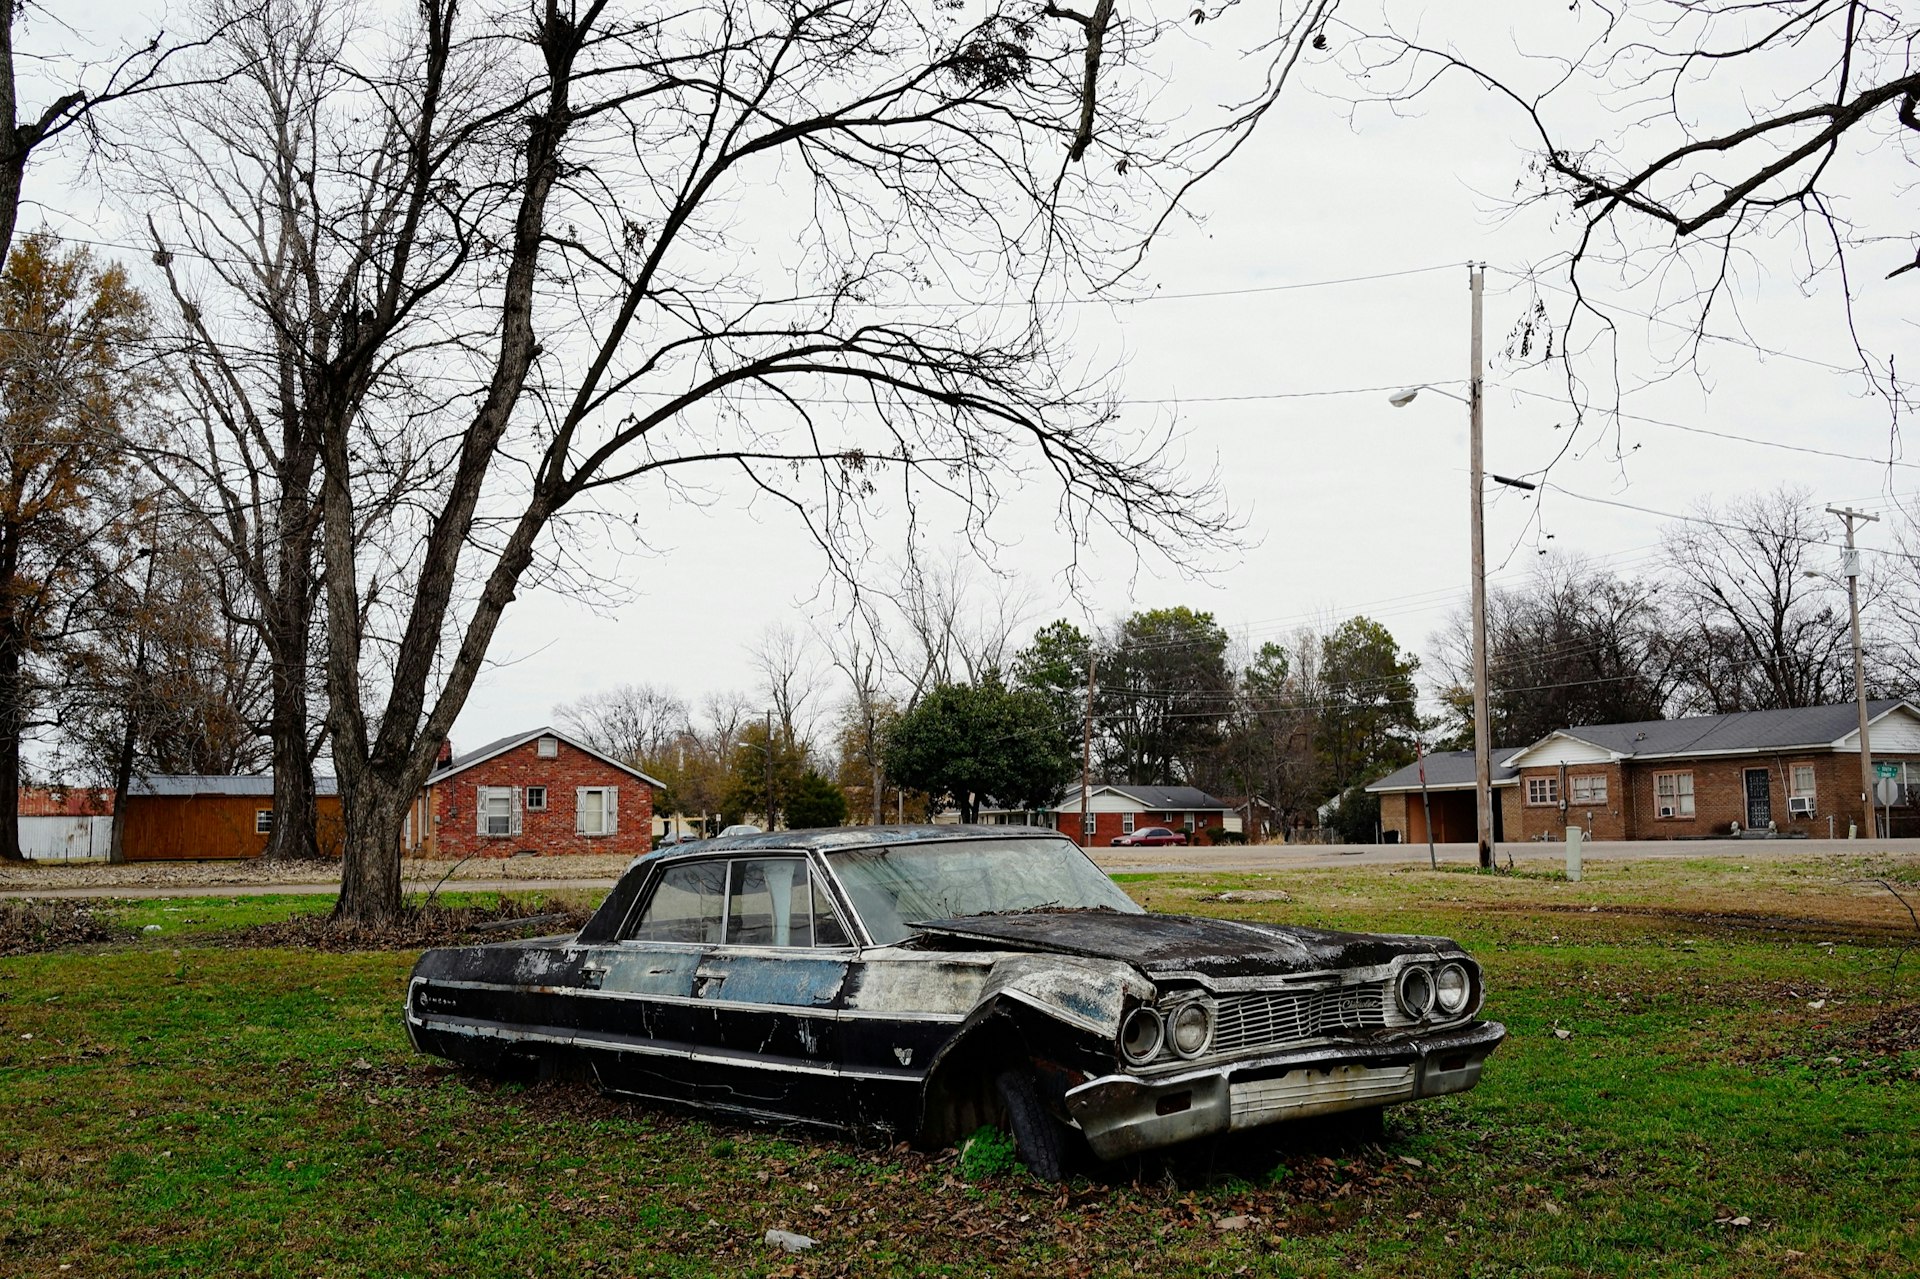 A moment of stillness shot while on assignment in Mound Bayou, Mississippi: the first all-black town in the US.